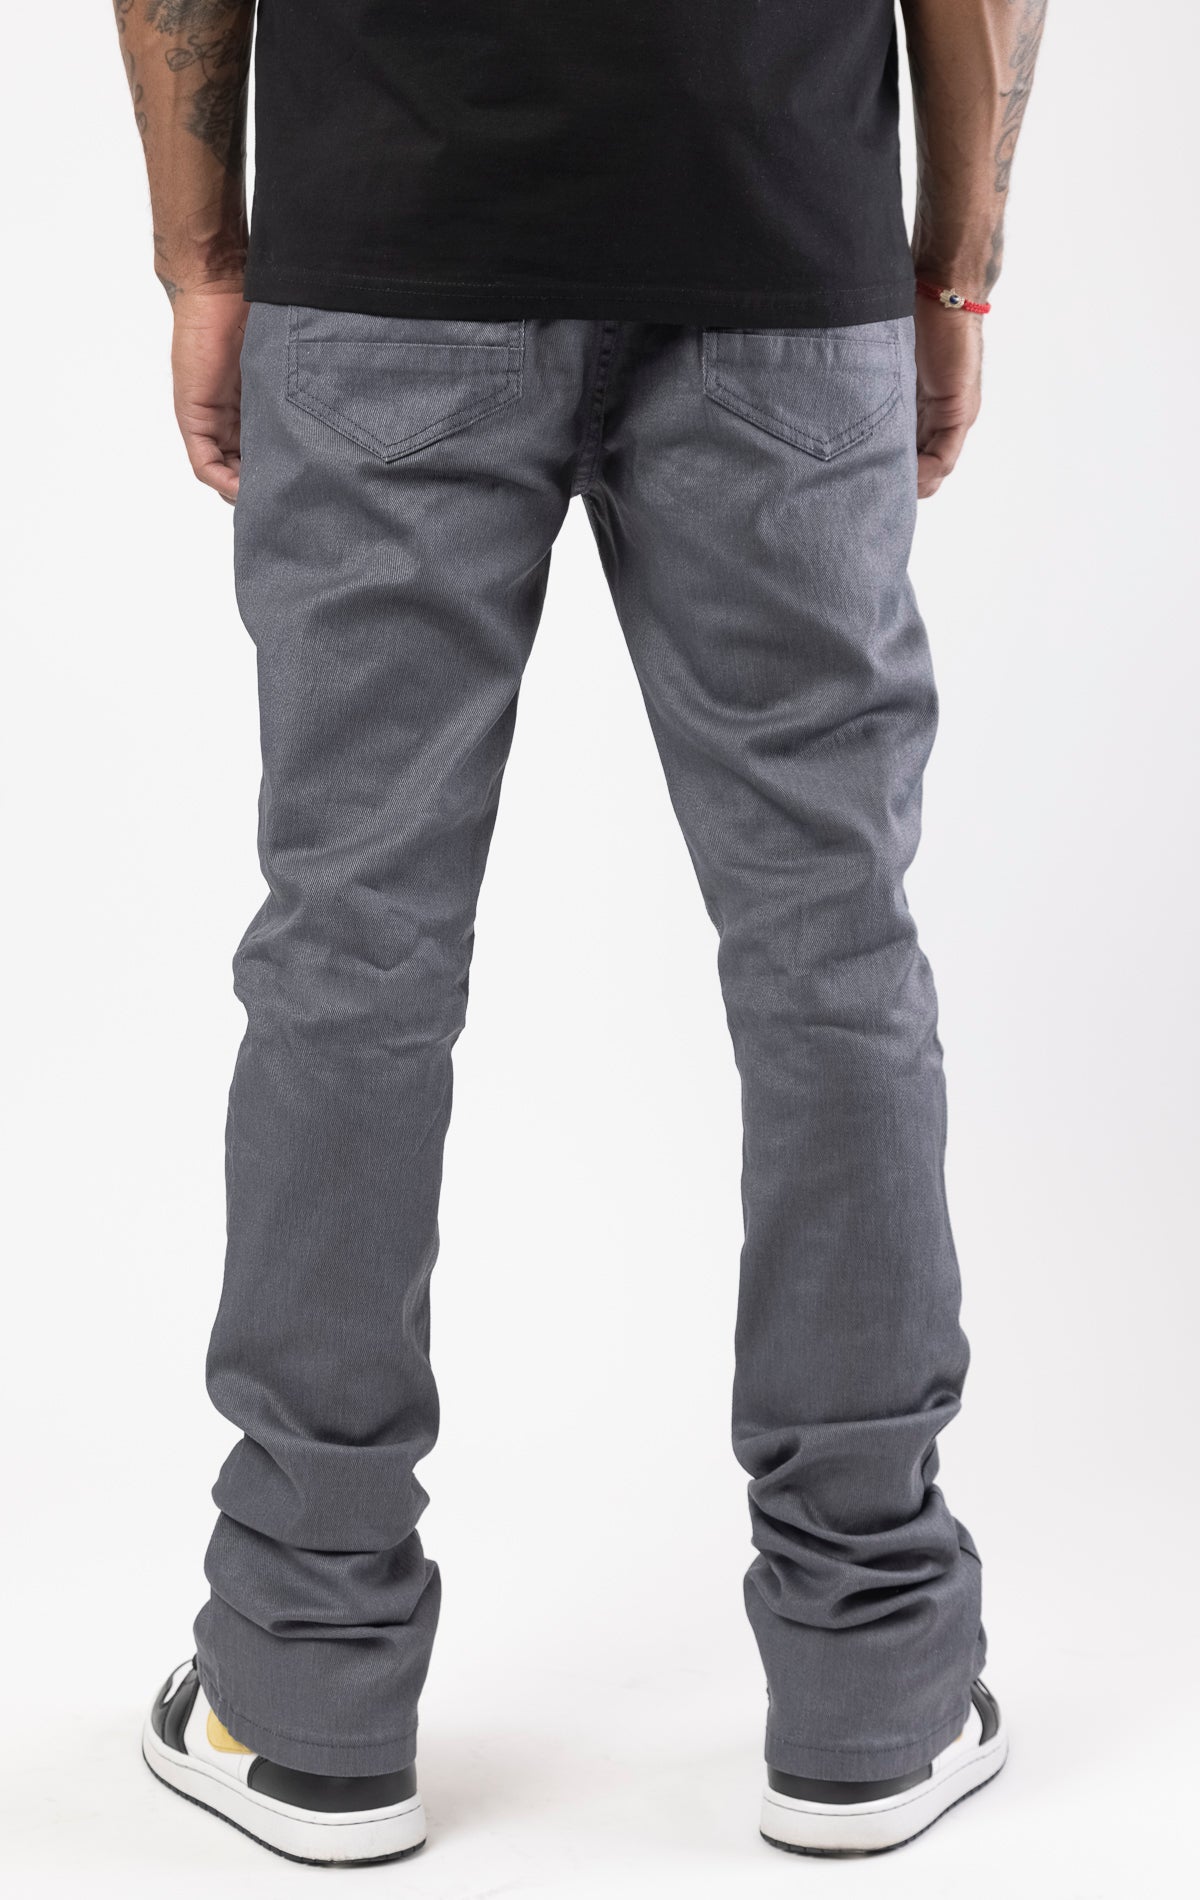 Grey Glossy denim with a regular rise, flared stacked jeans